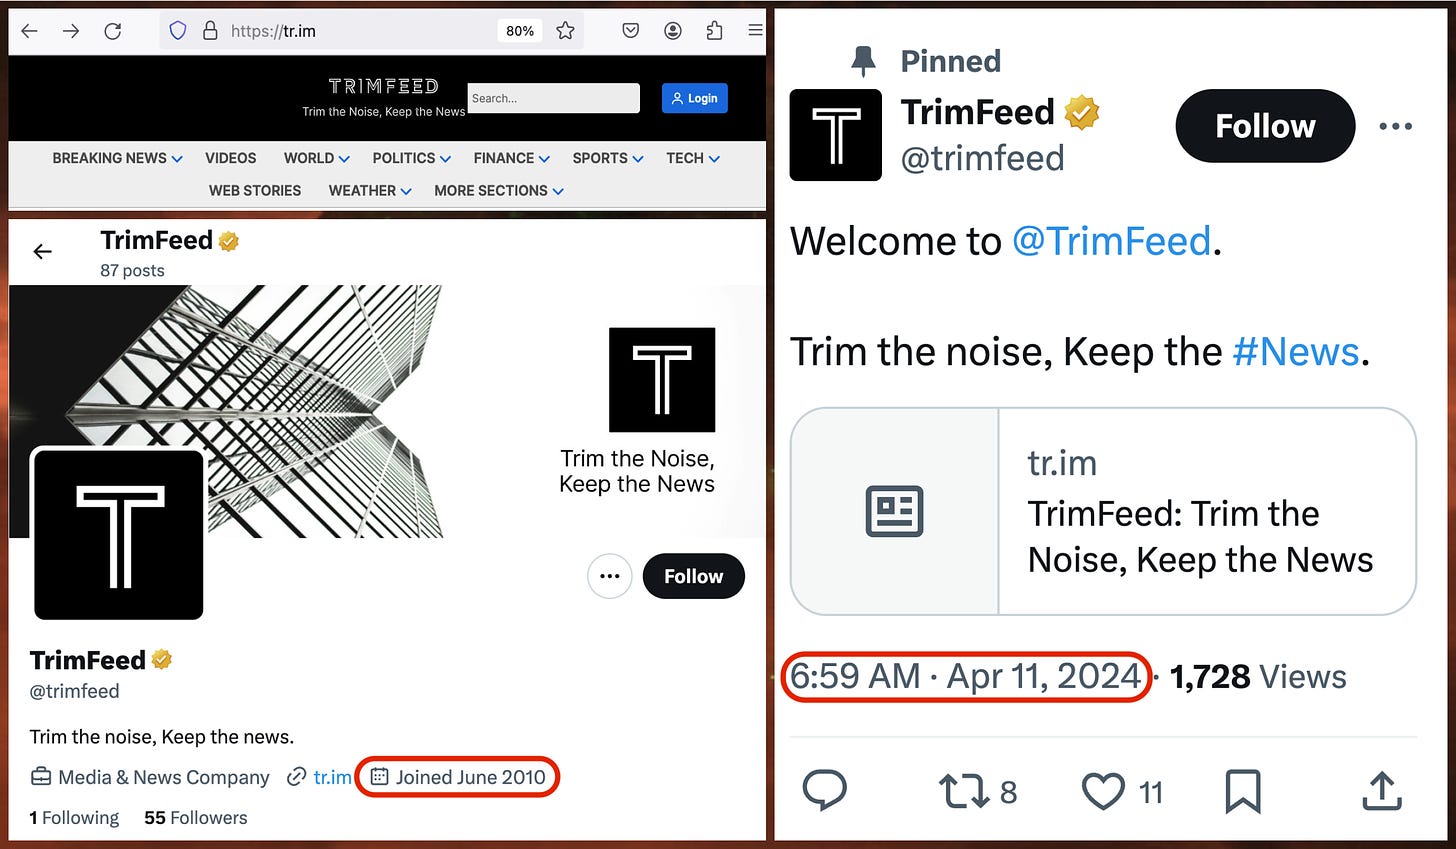 screenshots of the banner of the Trimfeed website (tr.im), the profile of the @trimfeed X account, created June 2010, and the oldest visible post from @trimfeed, dated April 11th 2024